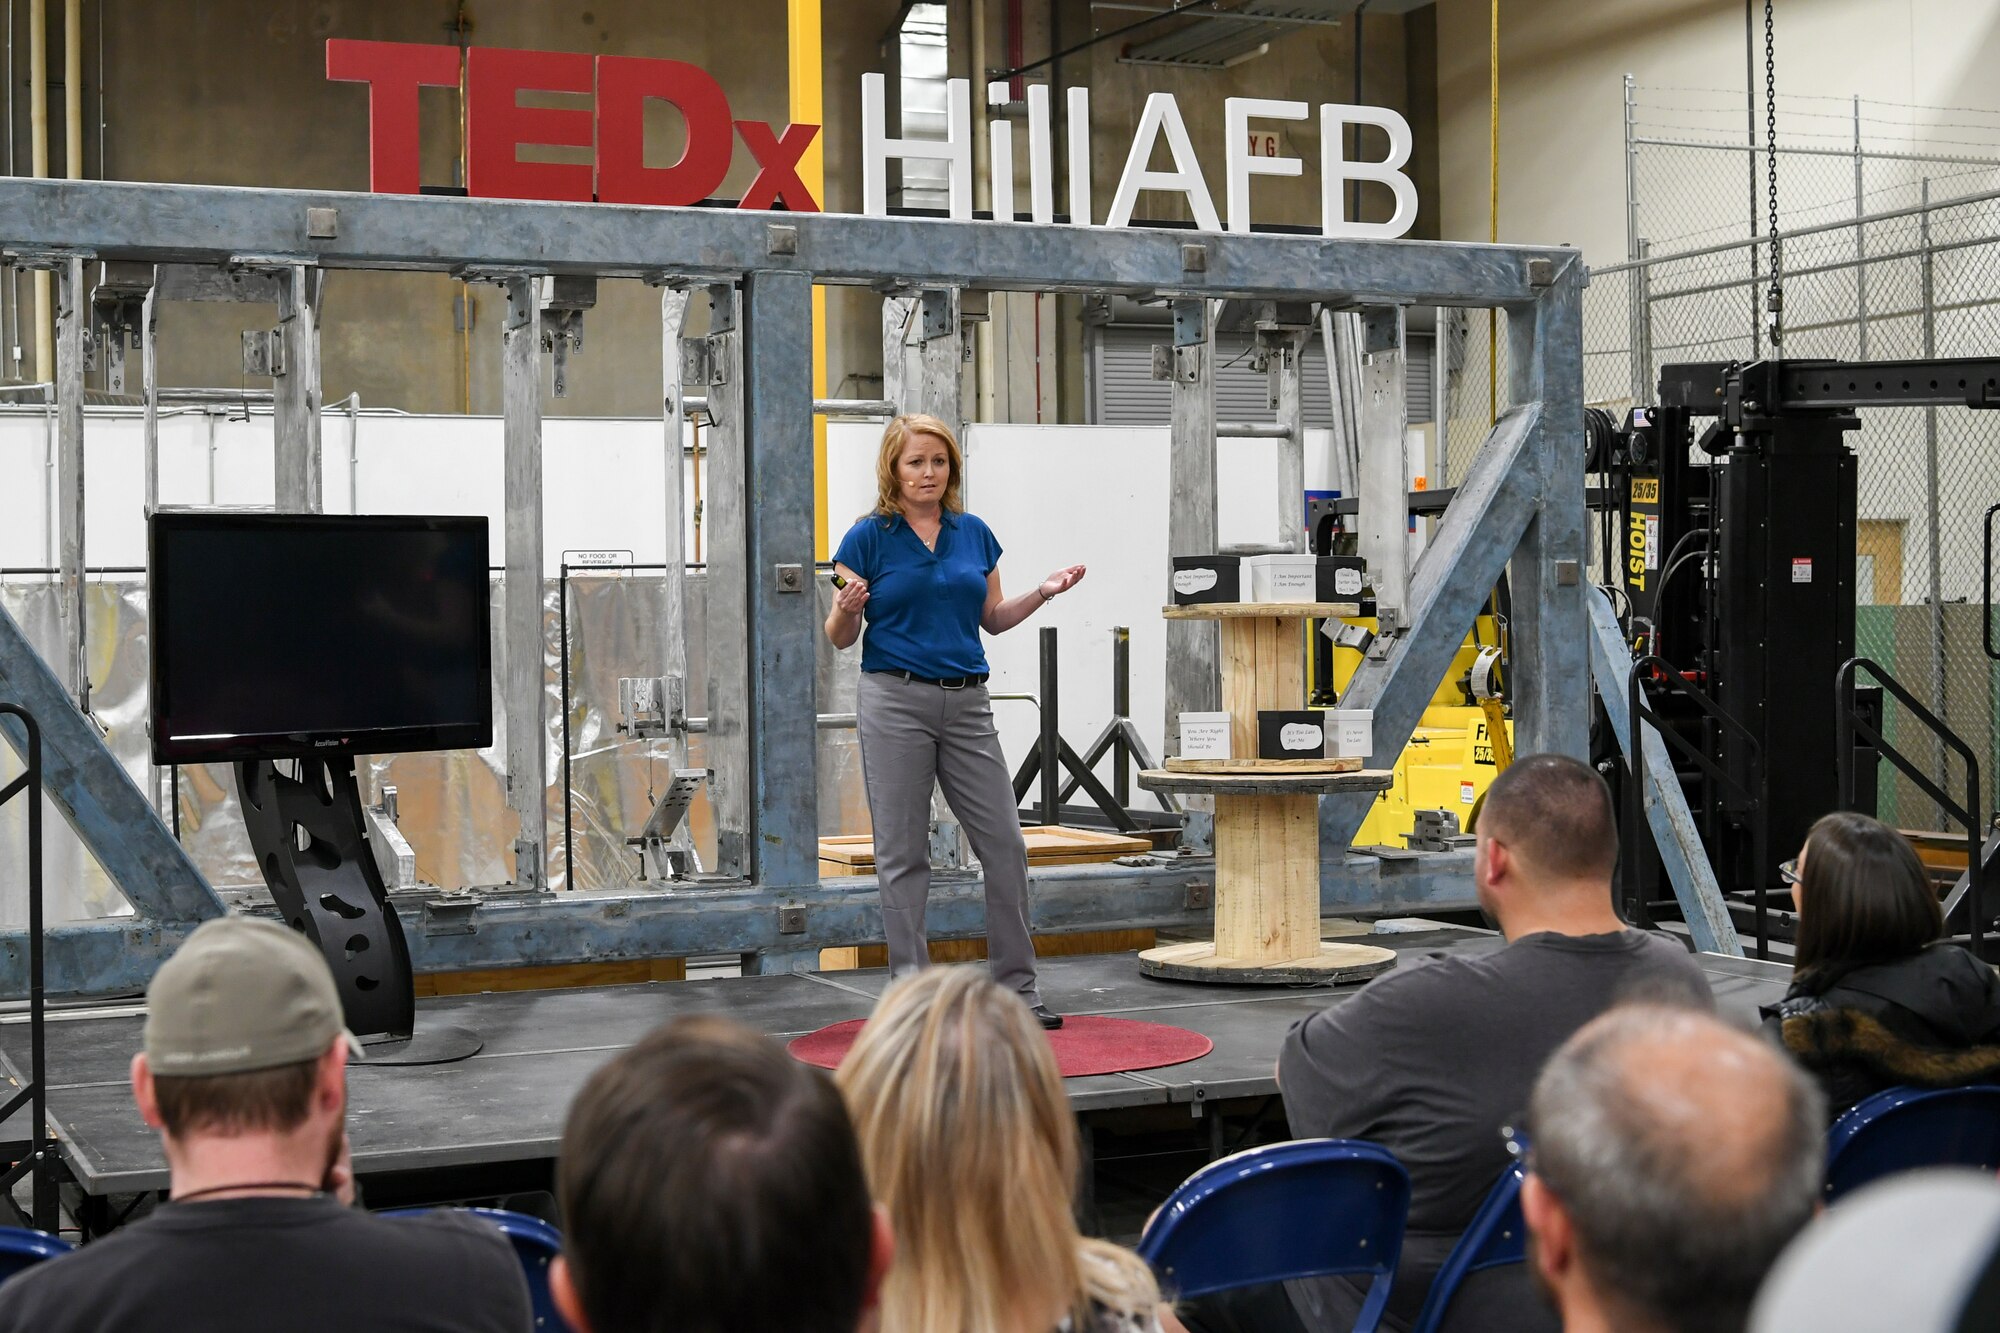 T.L. Coulter, career readiness consultant for 75th Force Support Squadron, speaks at the TEDx salon event held at Hill Air Force Base, Utah, Oct. 17, 2019. Her talk was about shelving negative thoughts for positive ones and how not to create self-limiting beliefs. (U.S. Air Force photo by Cynthia Griggs)